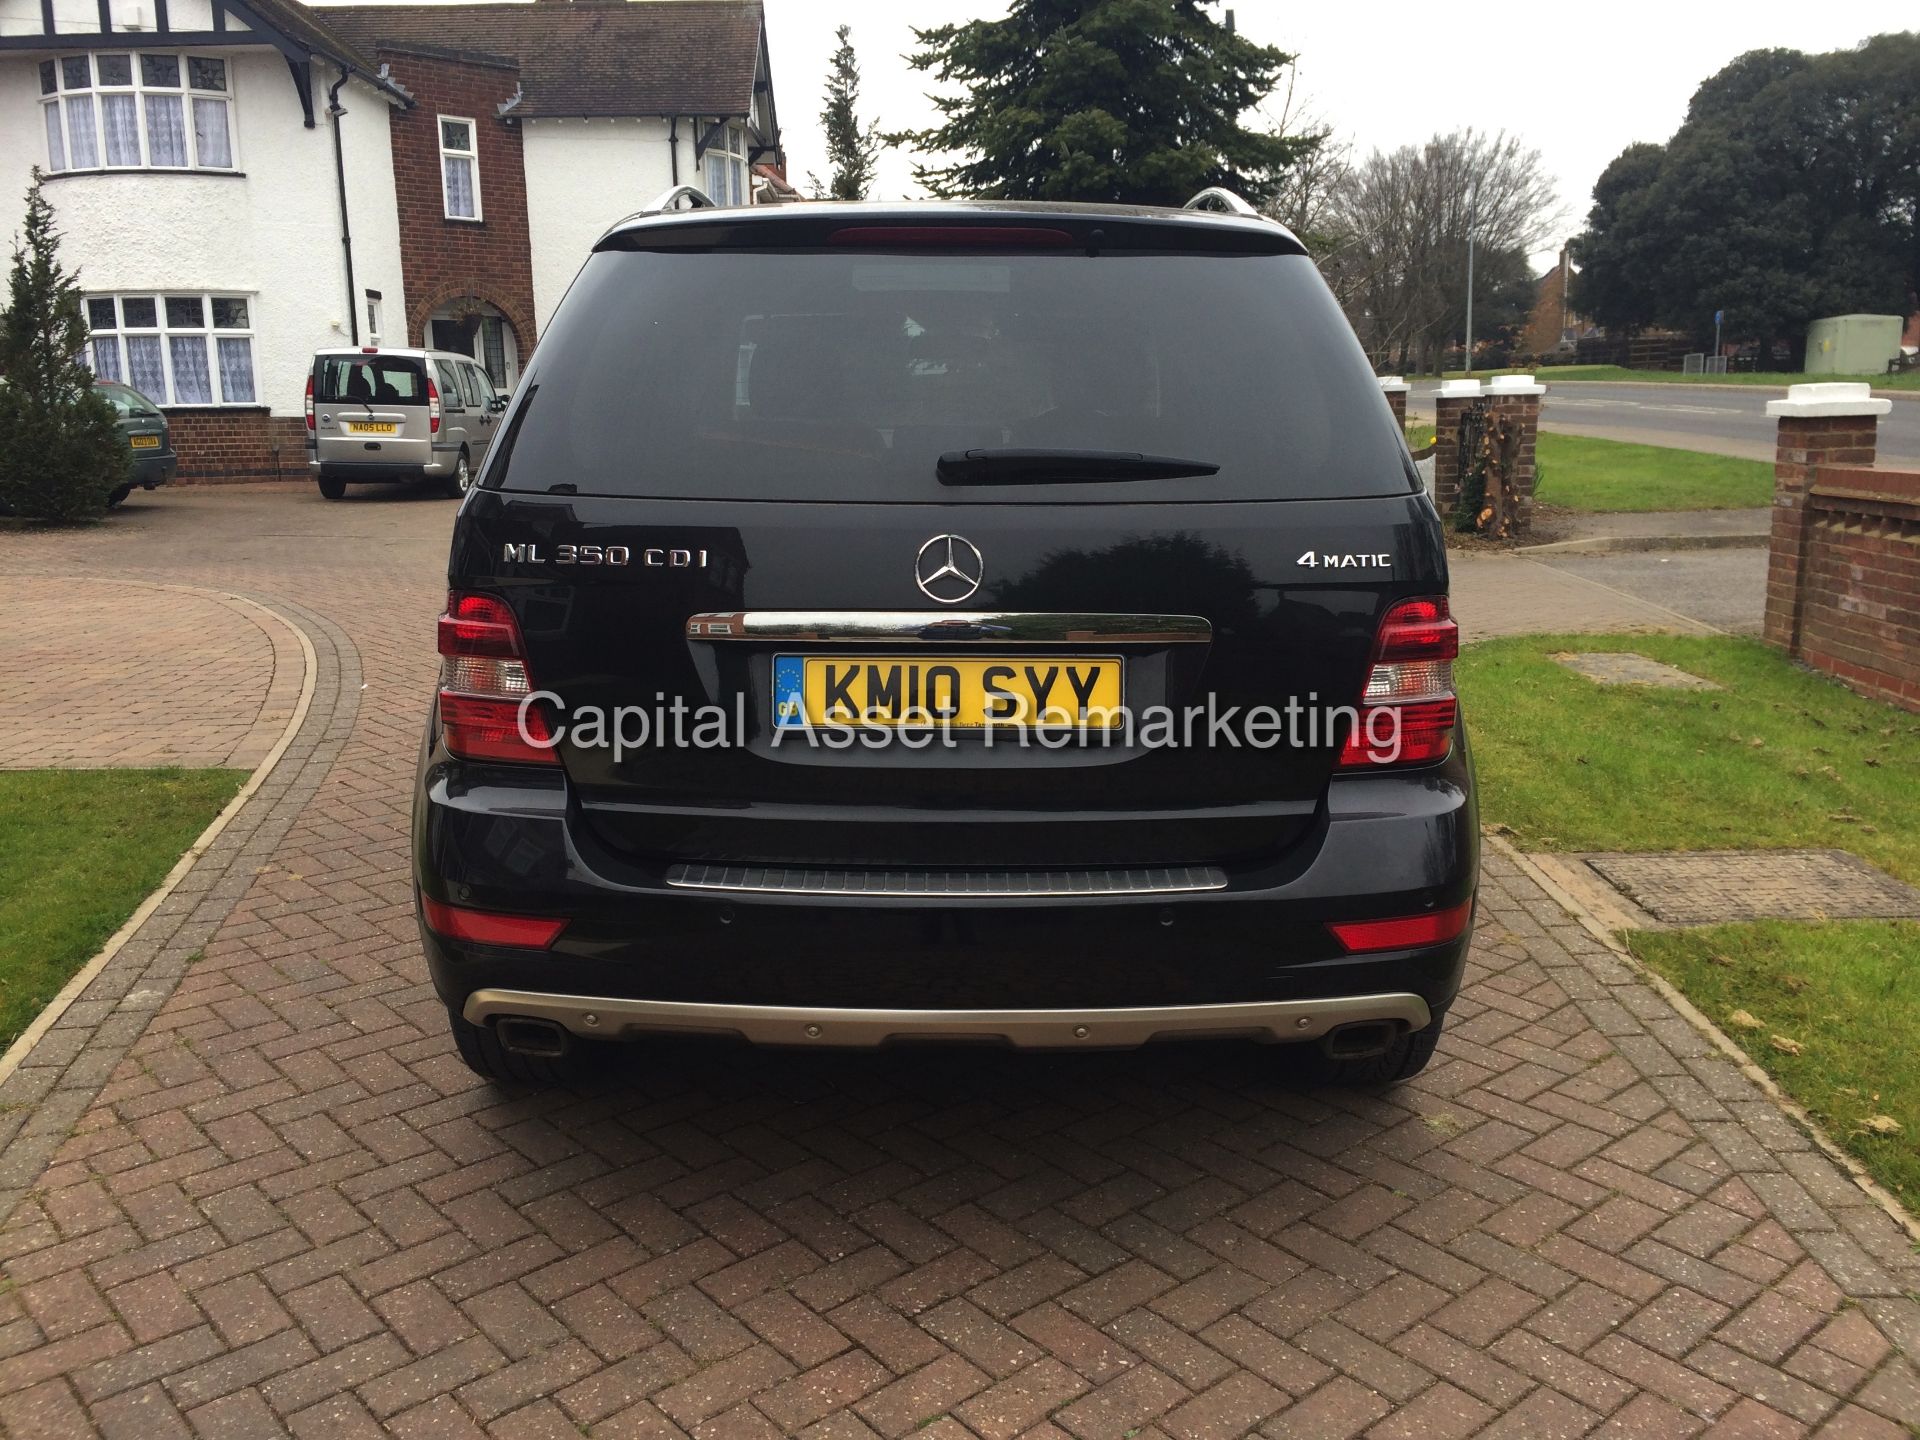 MERCEDES ML 350CDI "SPORT - BLACK EDITION" AUTO / TIP-TRONIC - FULLY LOADED - SAT NAV - STUNNING !!! - Image 6 of 25